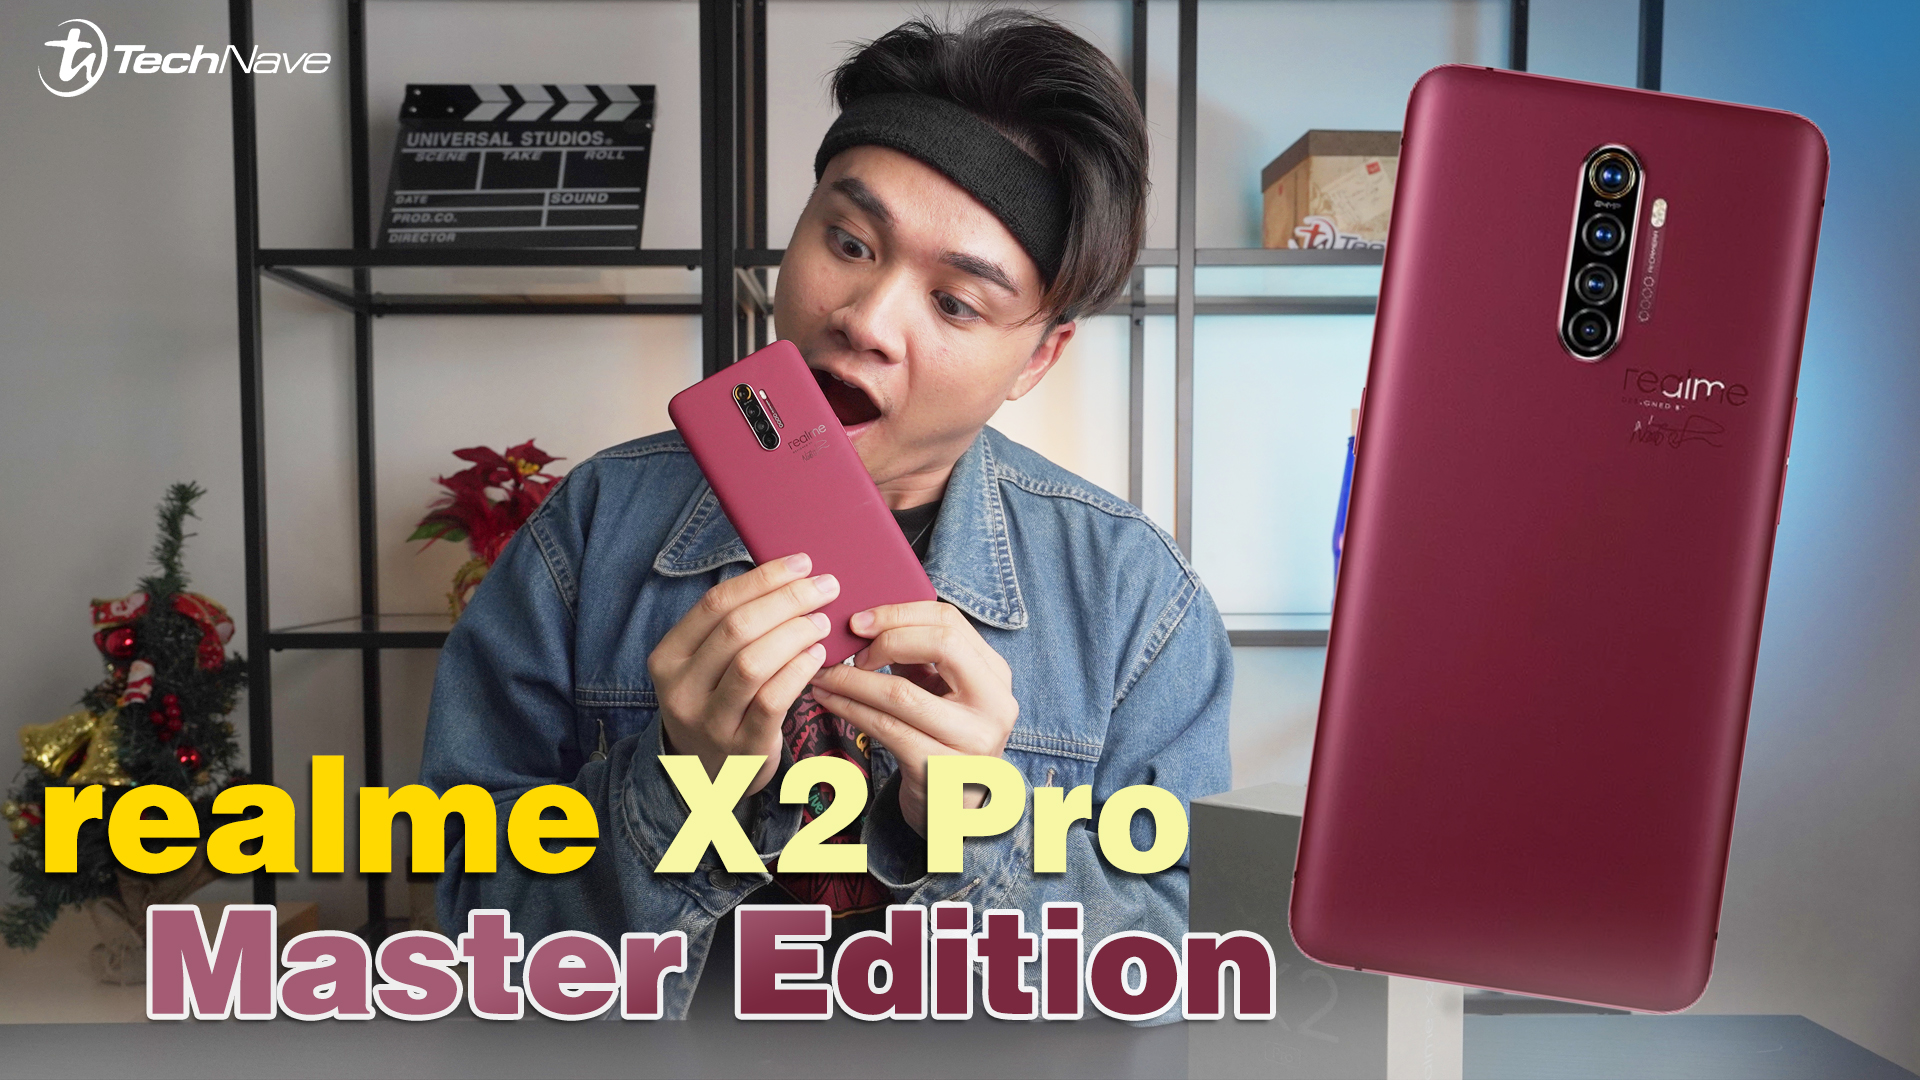 realme X2 Pro Master Edition is in Malaysia with just limited to 50 units!